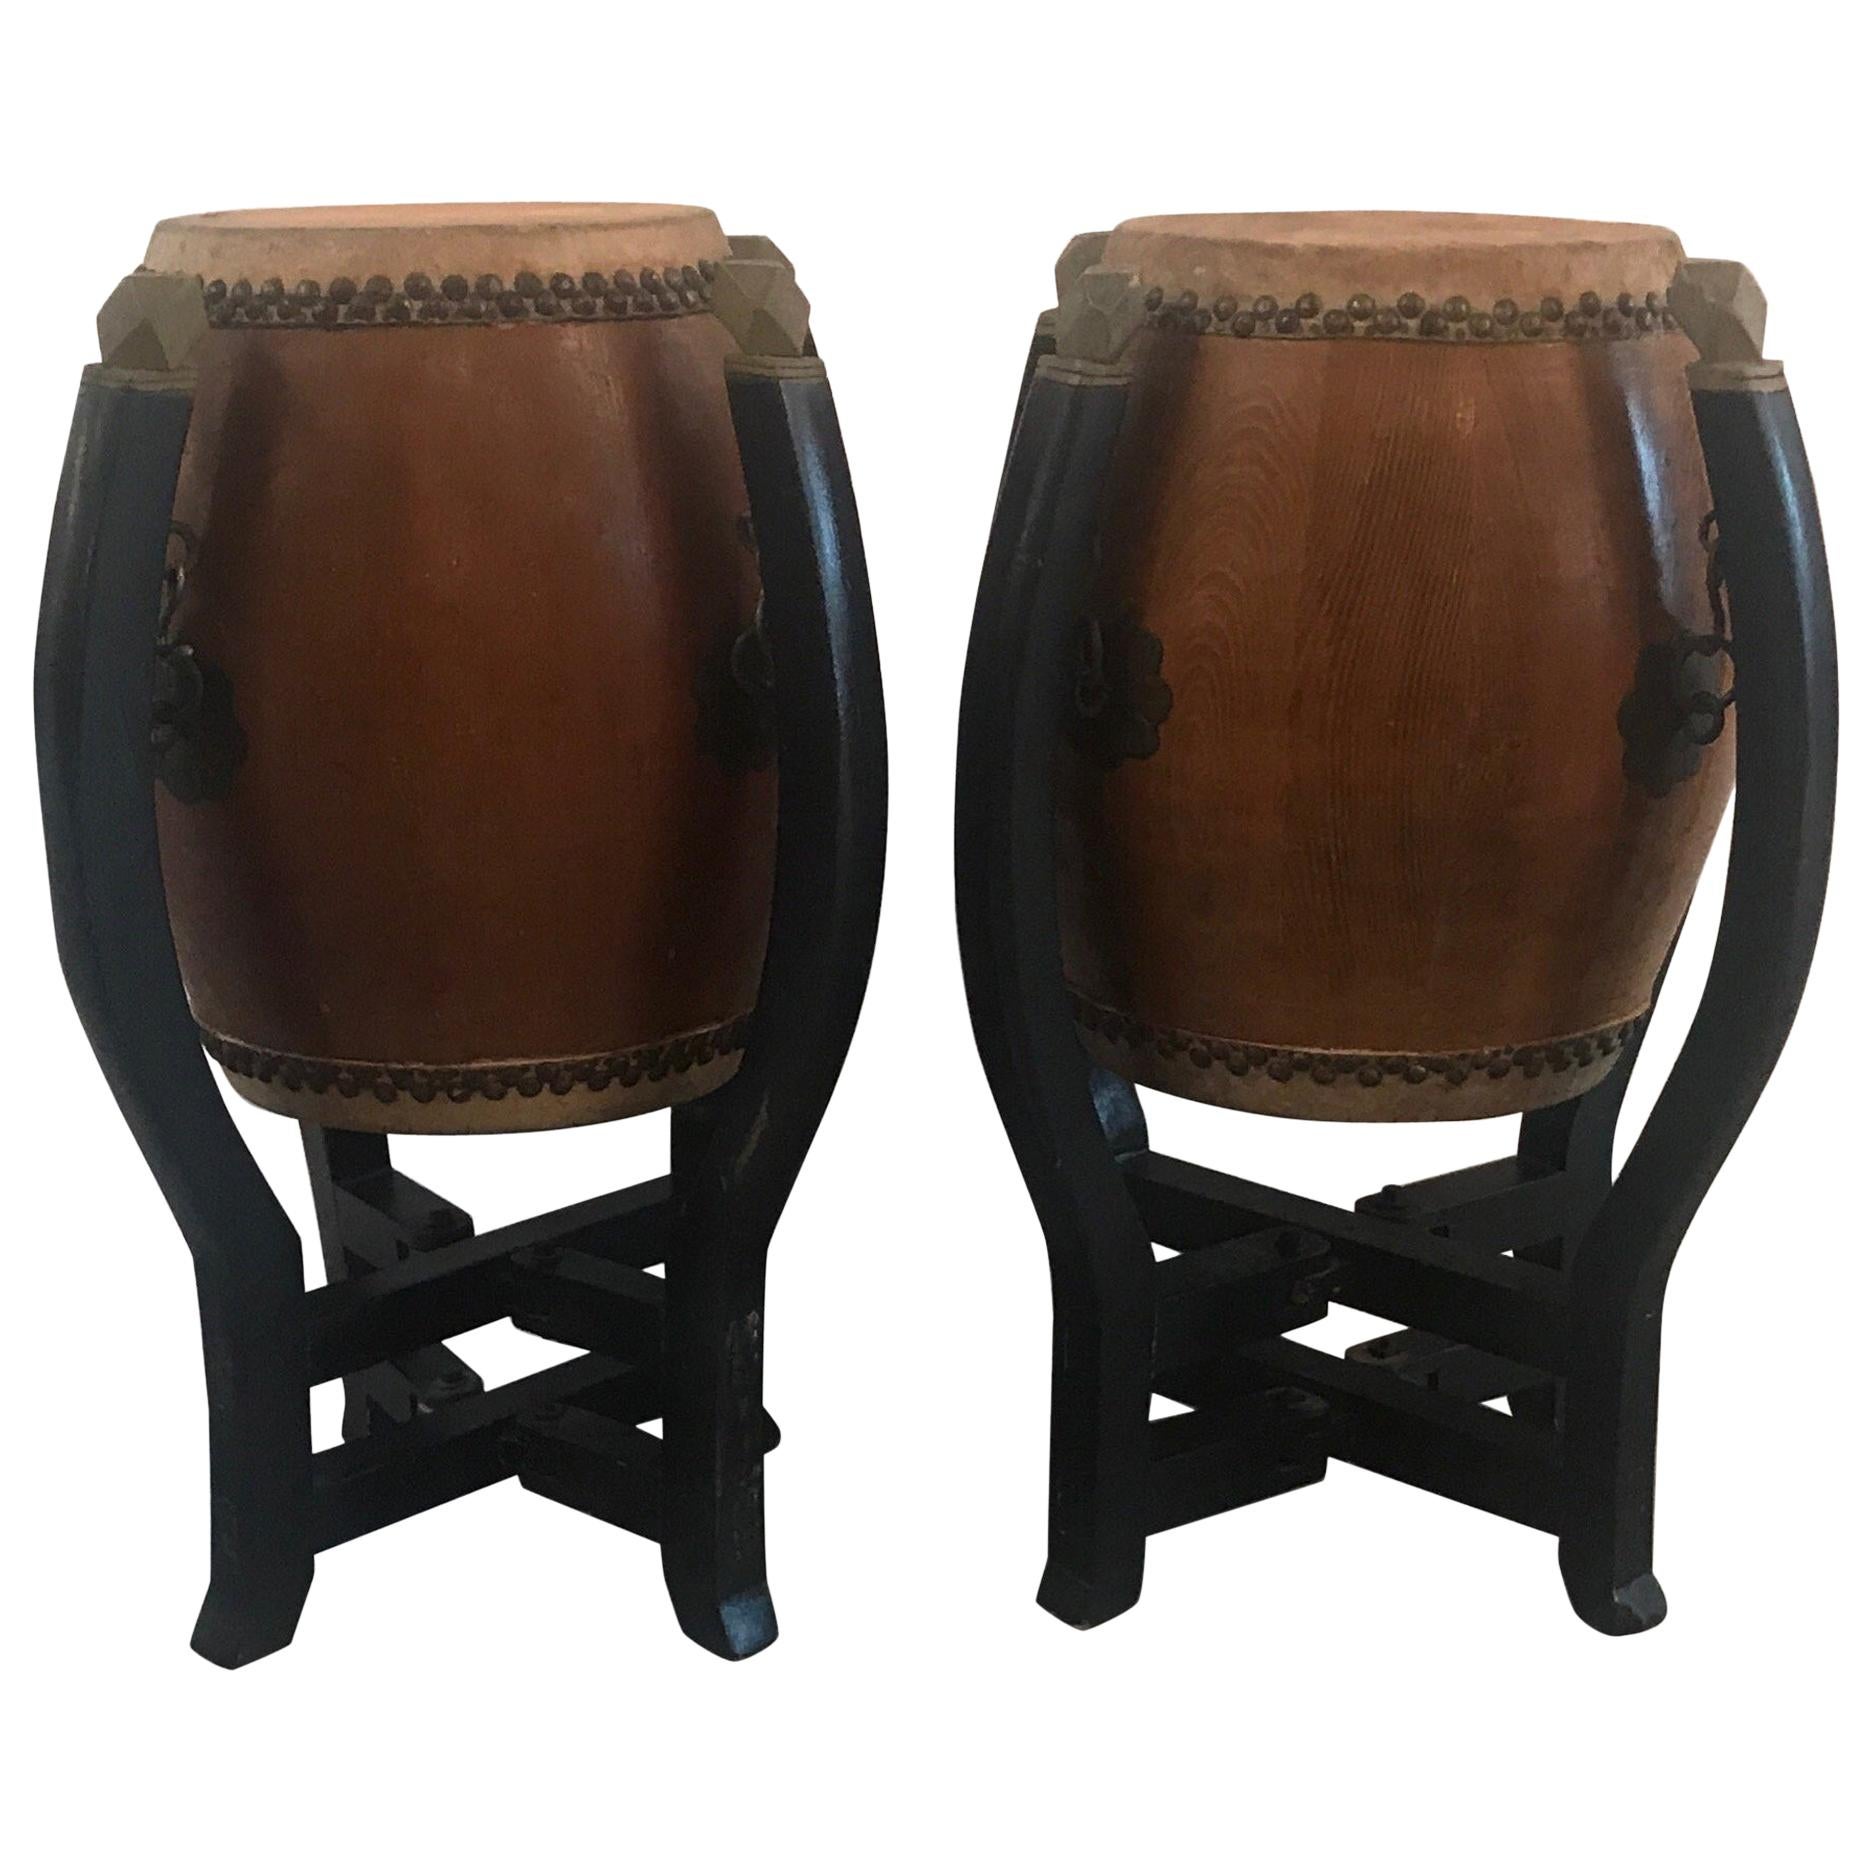 Pair of Asian Hardwood Drums with Collapsible Stands